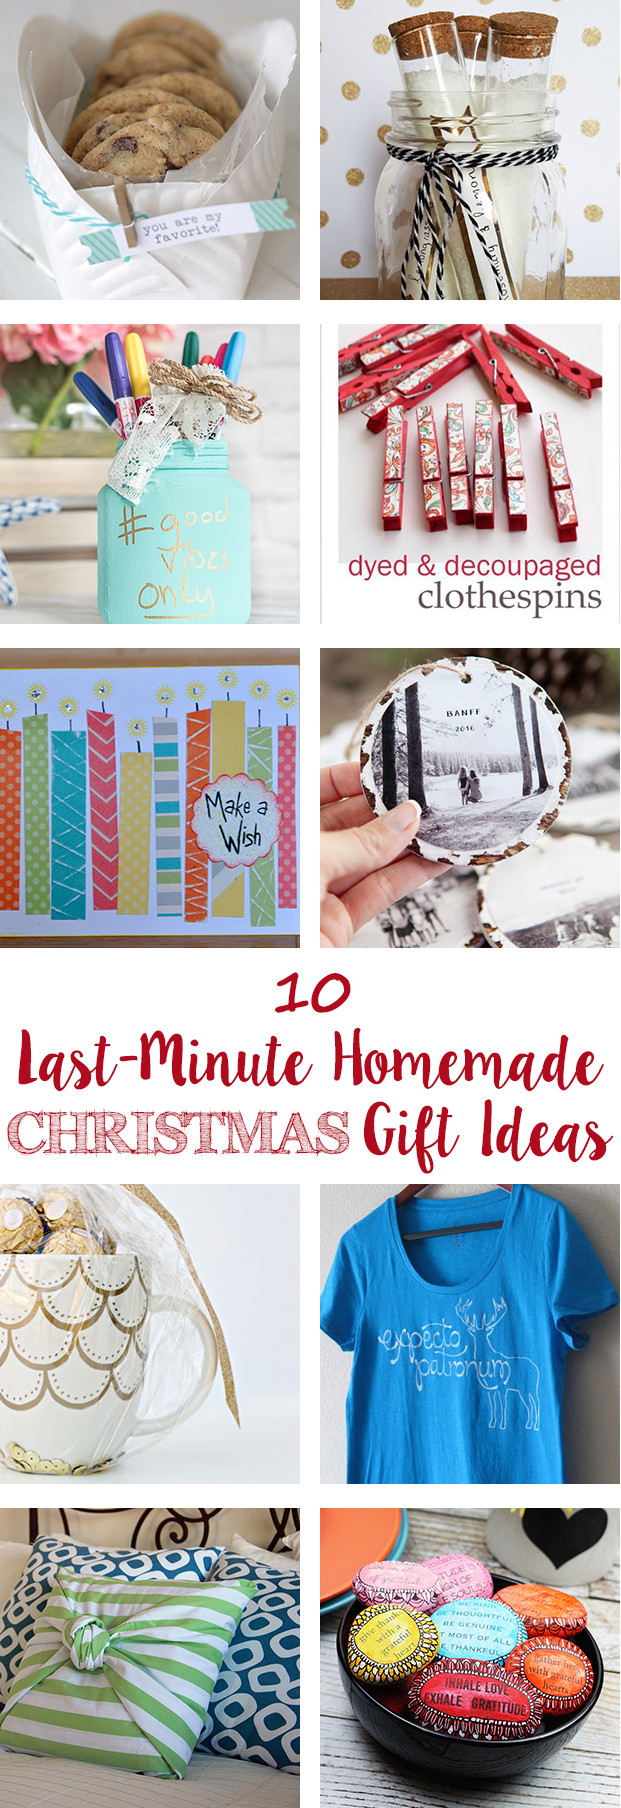 Last Minute DIY Christmas Gifts
 Last Minute Homemade Christmas Gift Ideas • Rose Clearfield